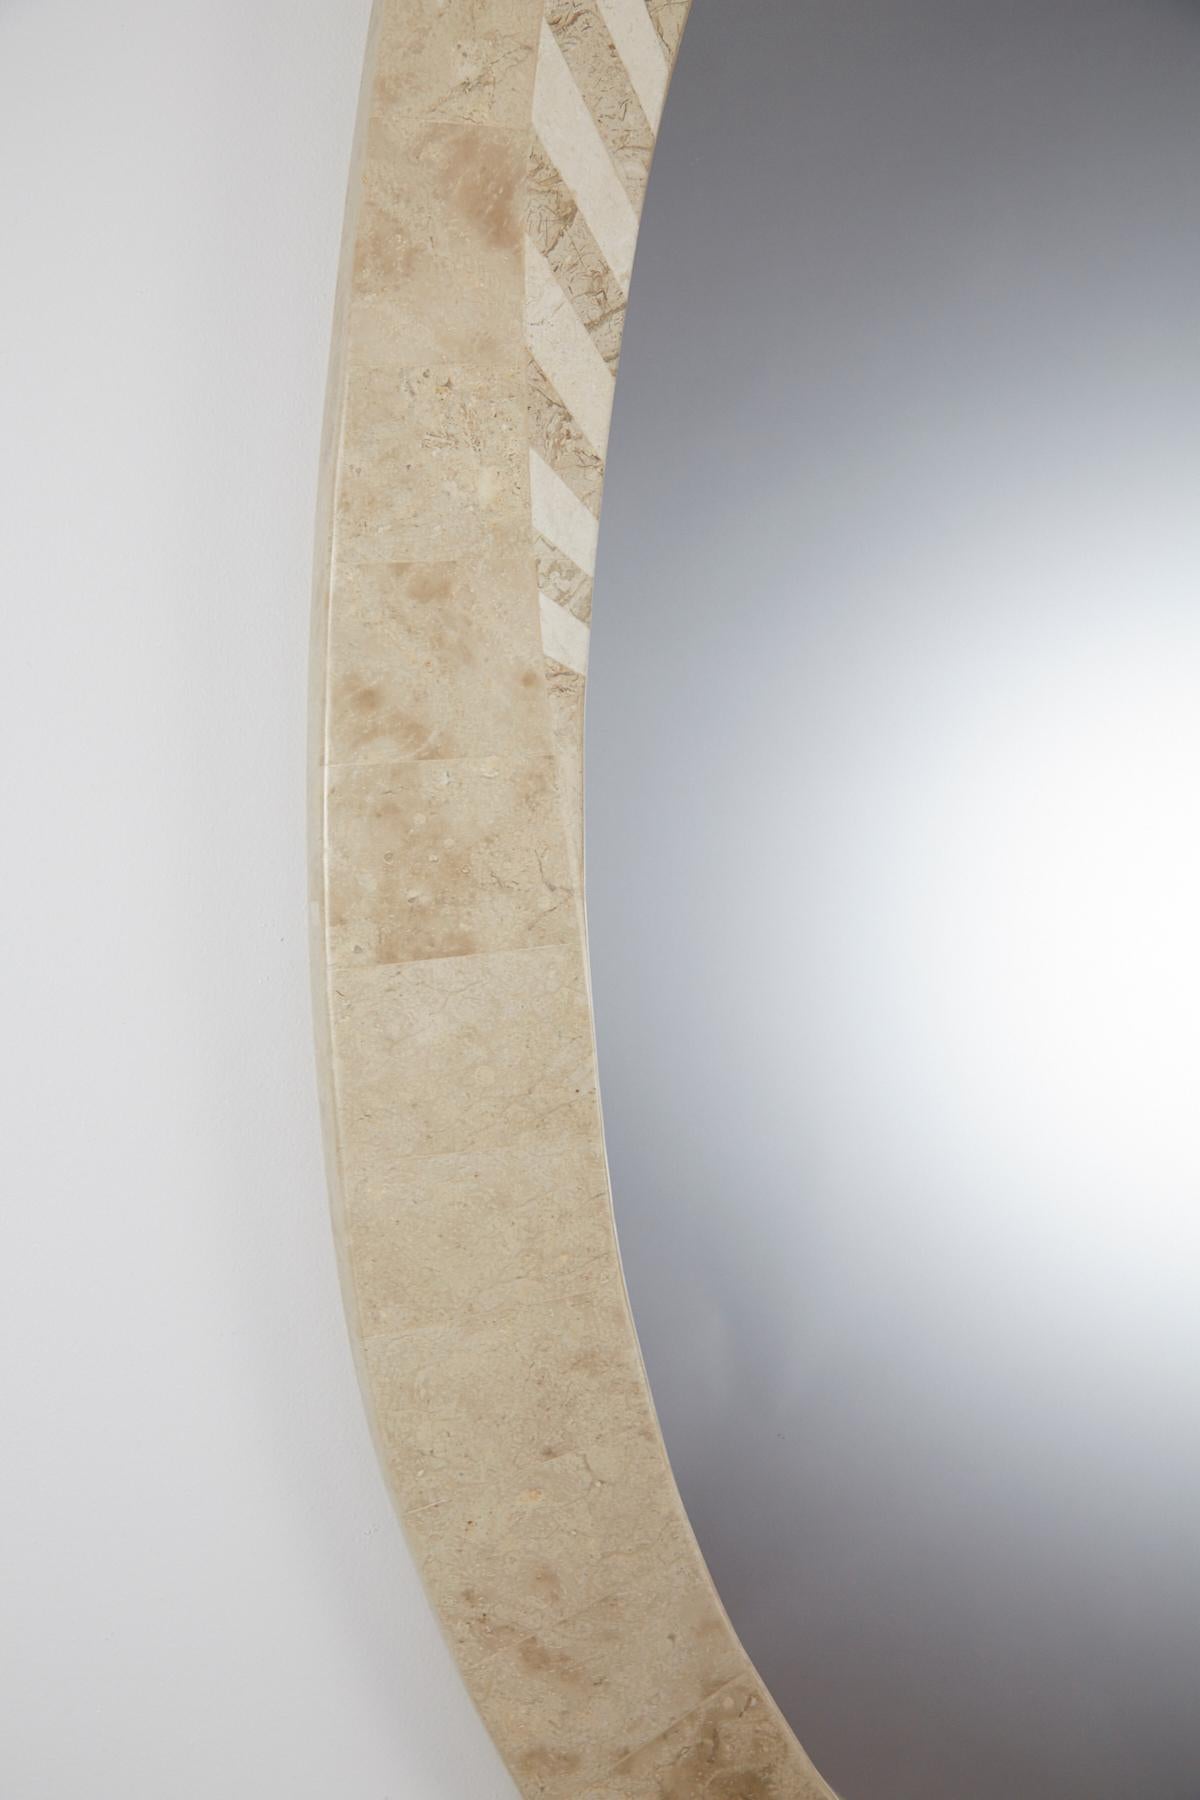 Oval-shaped mirror with frame completely covered in inlaid light beige fossil stone, with a broken pediment style connection between either side of the mirror. Each side is half- covered in stripes of white stone. Backed with painted wood. 

Pair